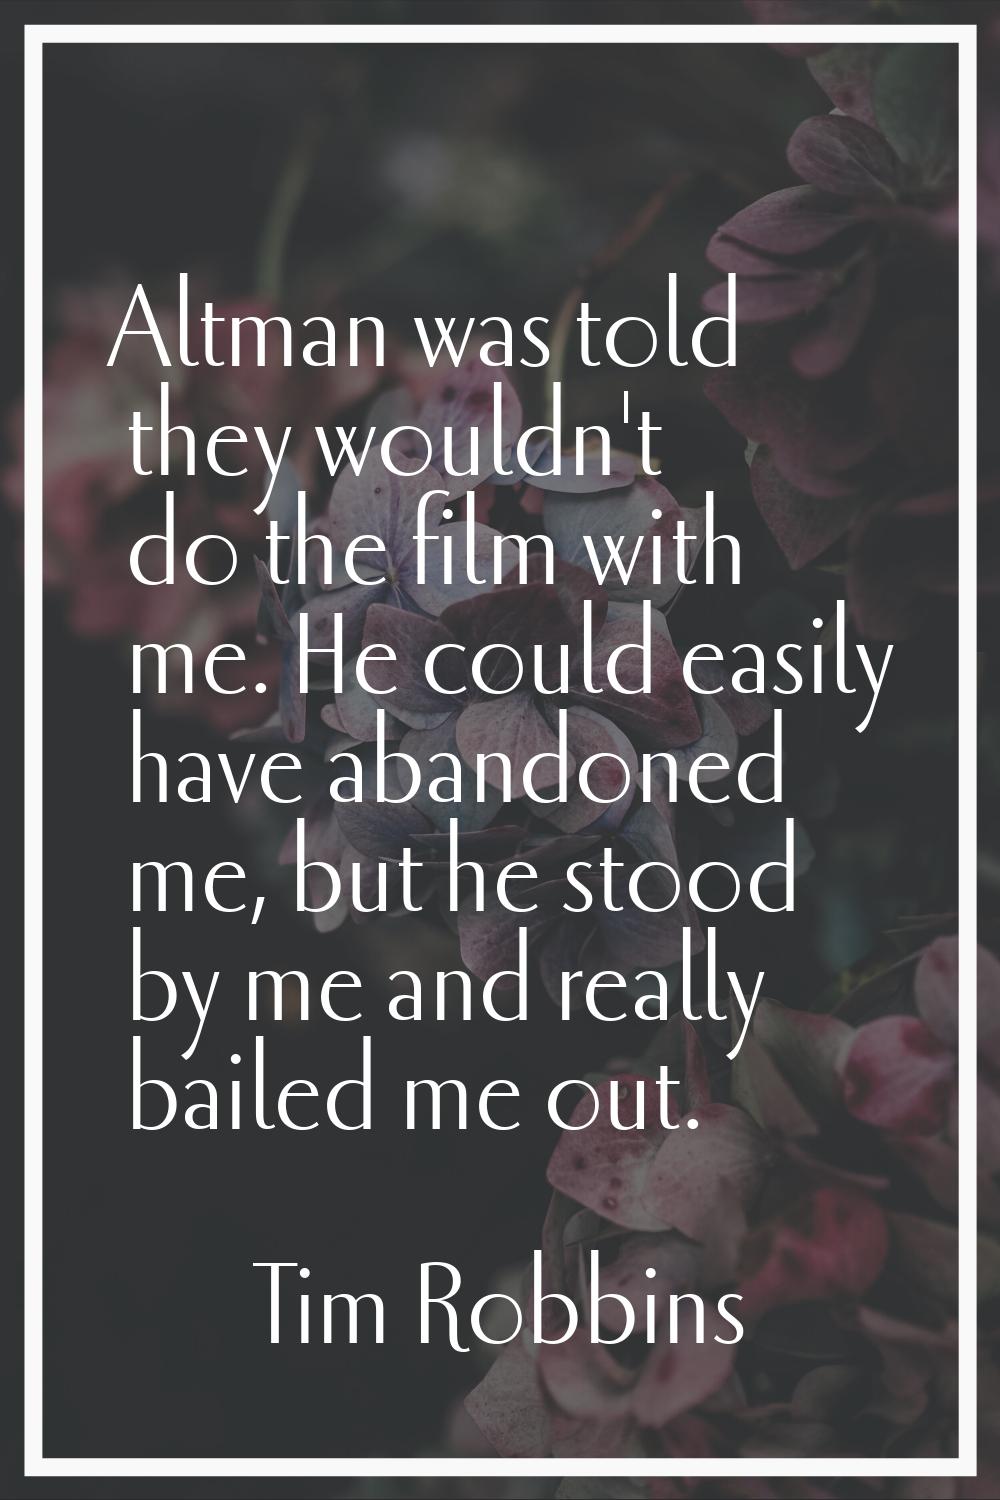 Altman was told they wouldn't do the film with me. He could easily have abandoned me, but he stood 